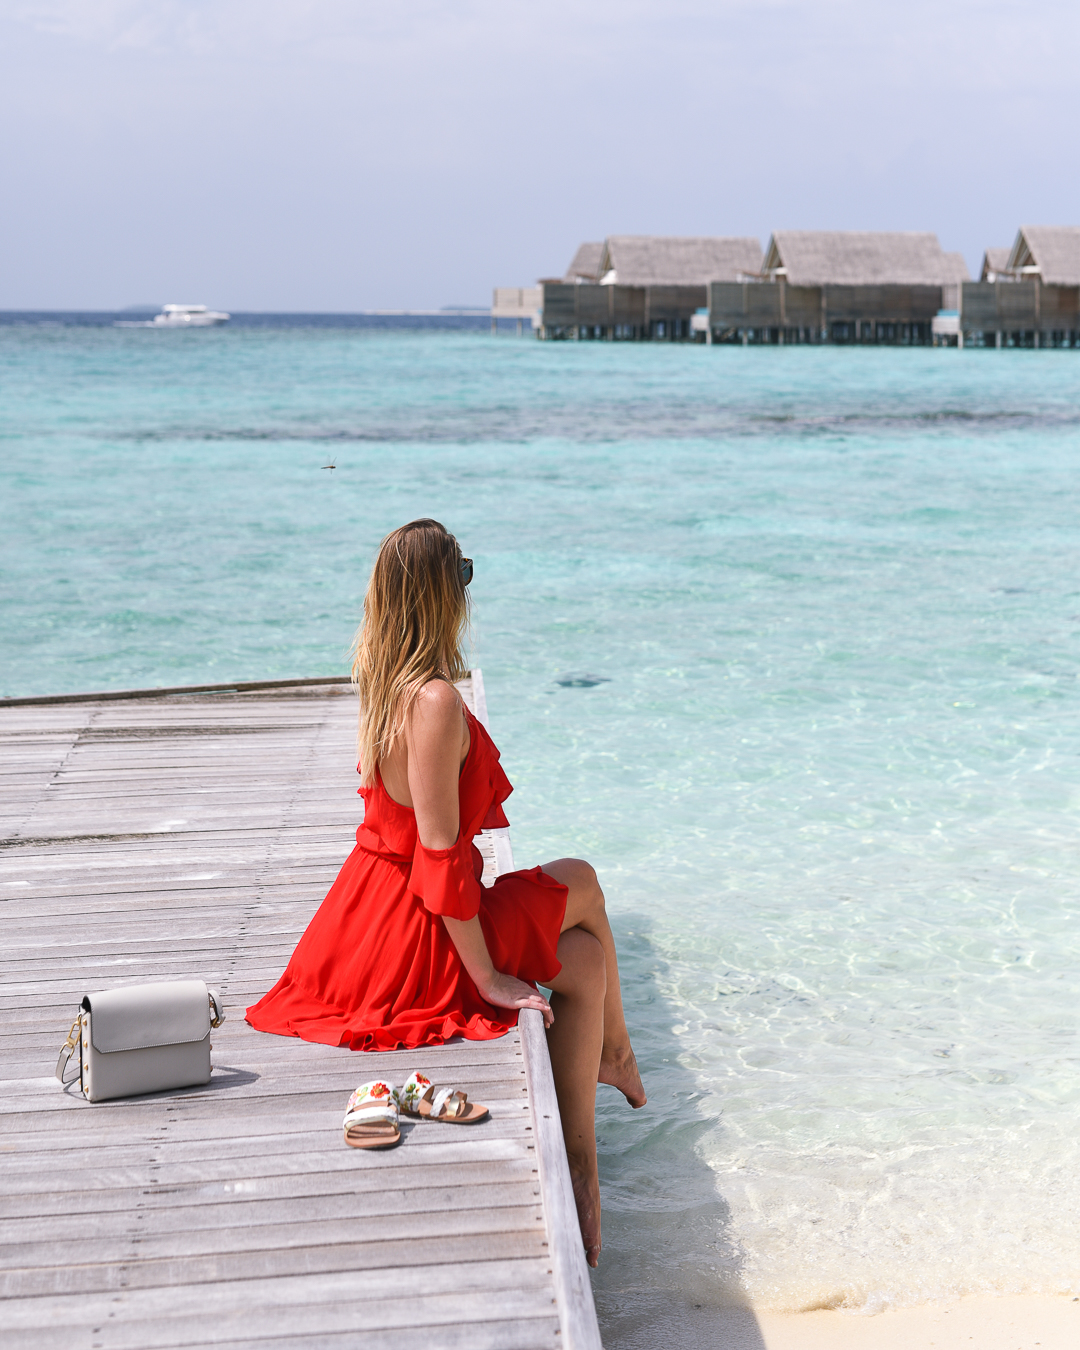 fashion blogger travel guide to the maldives - Maldives Resort Review: Milaidhoo by popular Chicago blogger Visions of Vogue